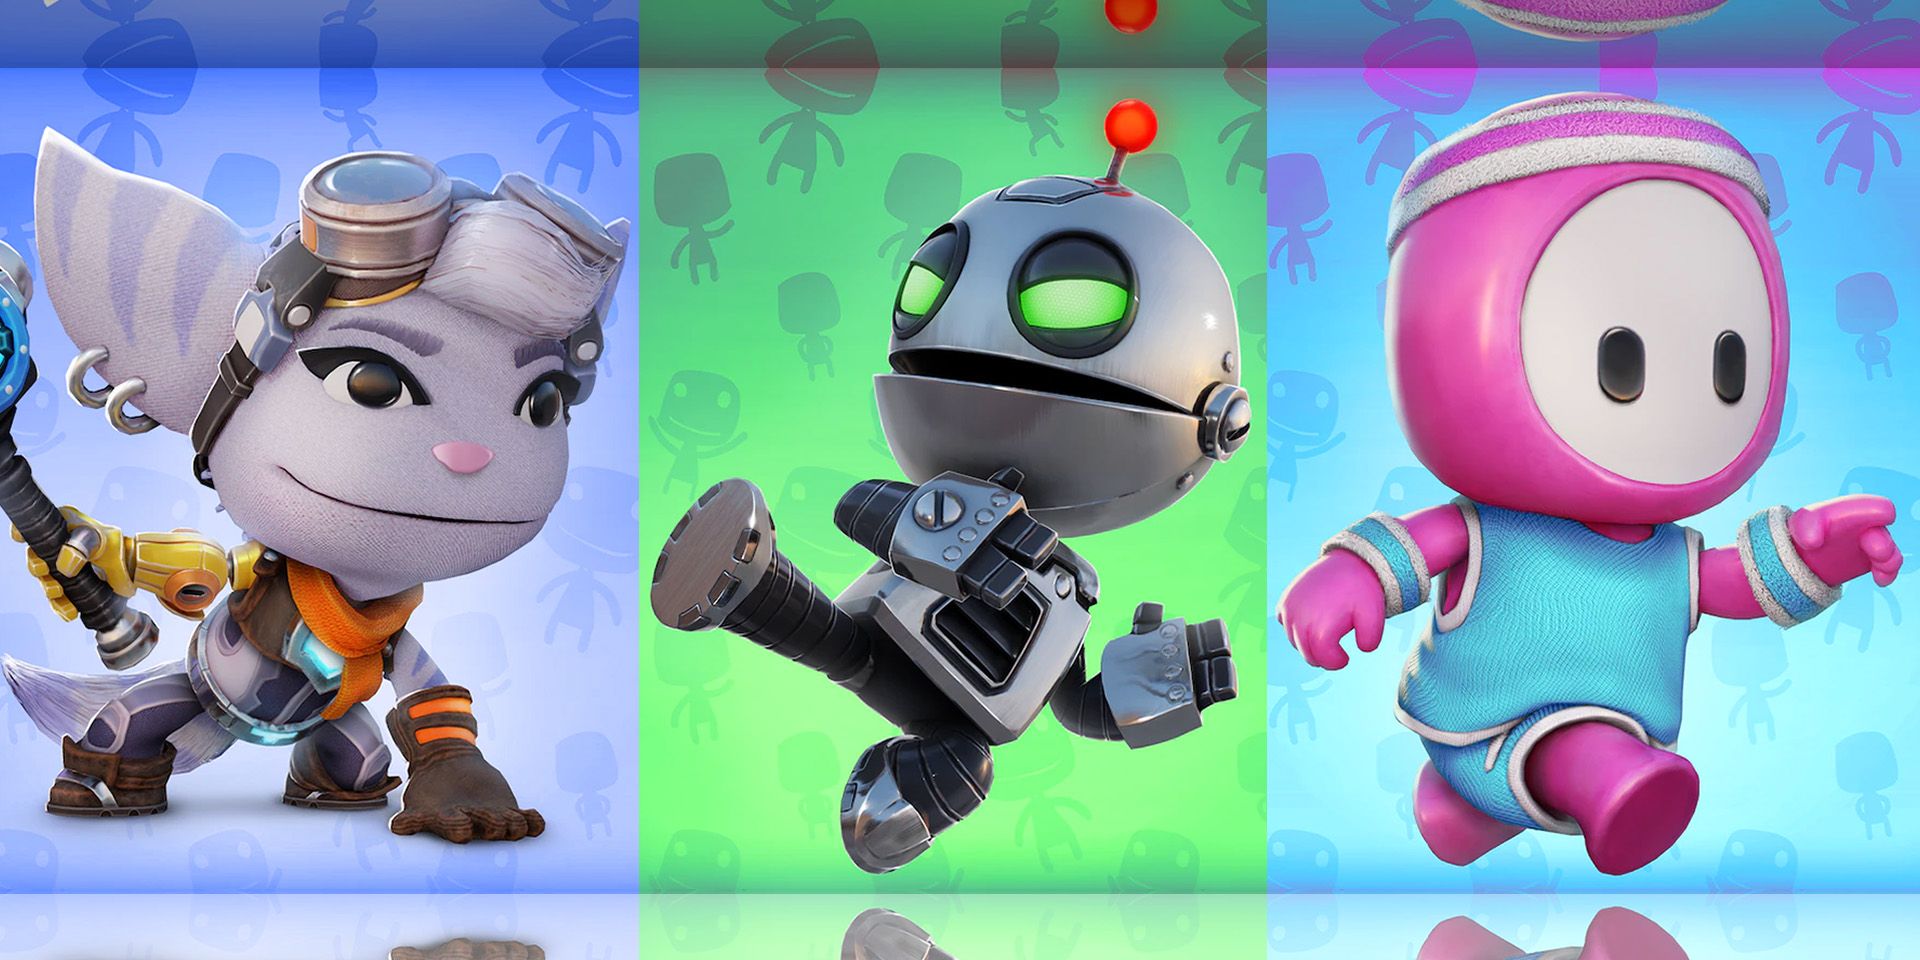 Ultimate Sackboy: The New Endless Runner Game Coming to Mobile Is Set to  Release February 21 - KeenGamer